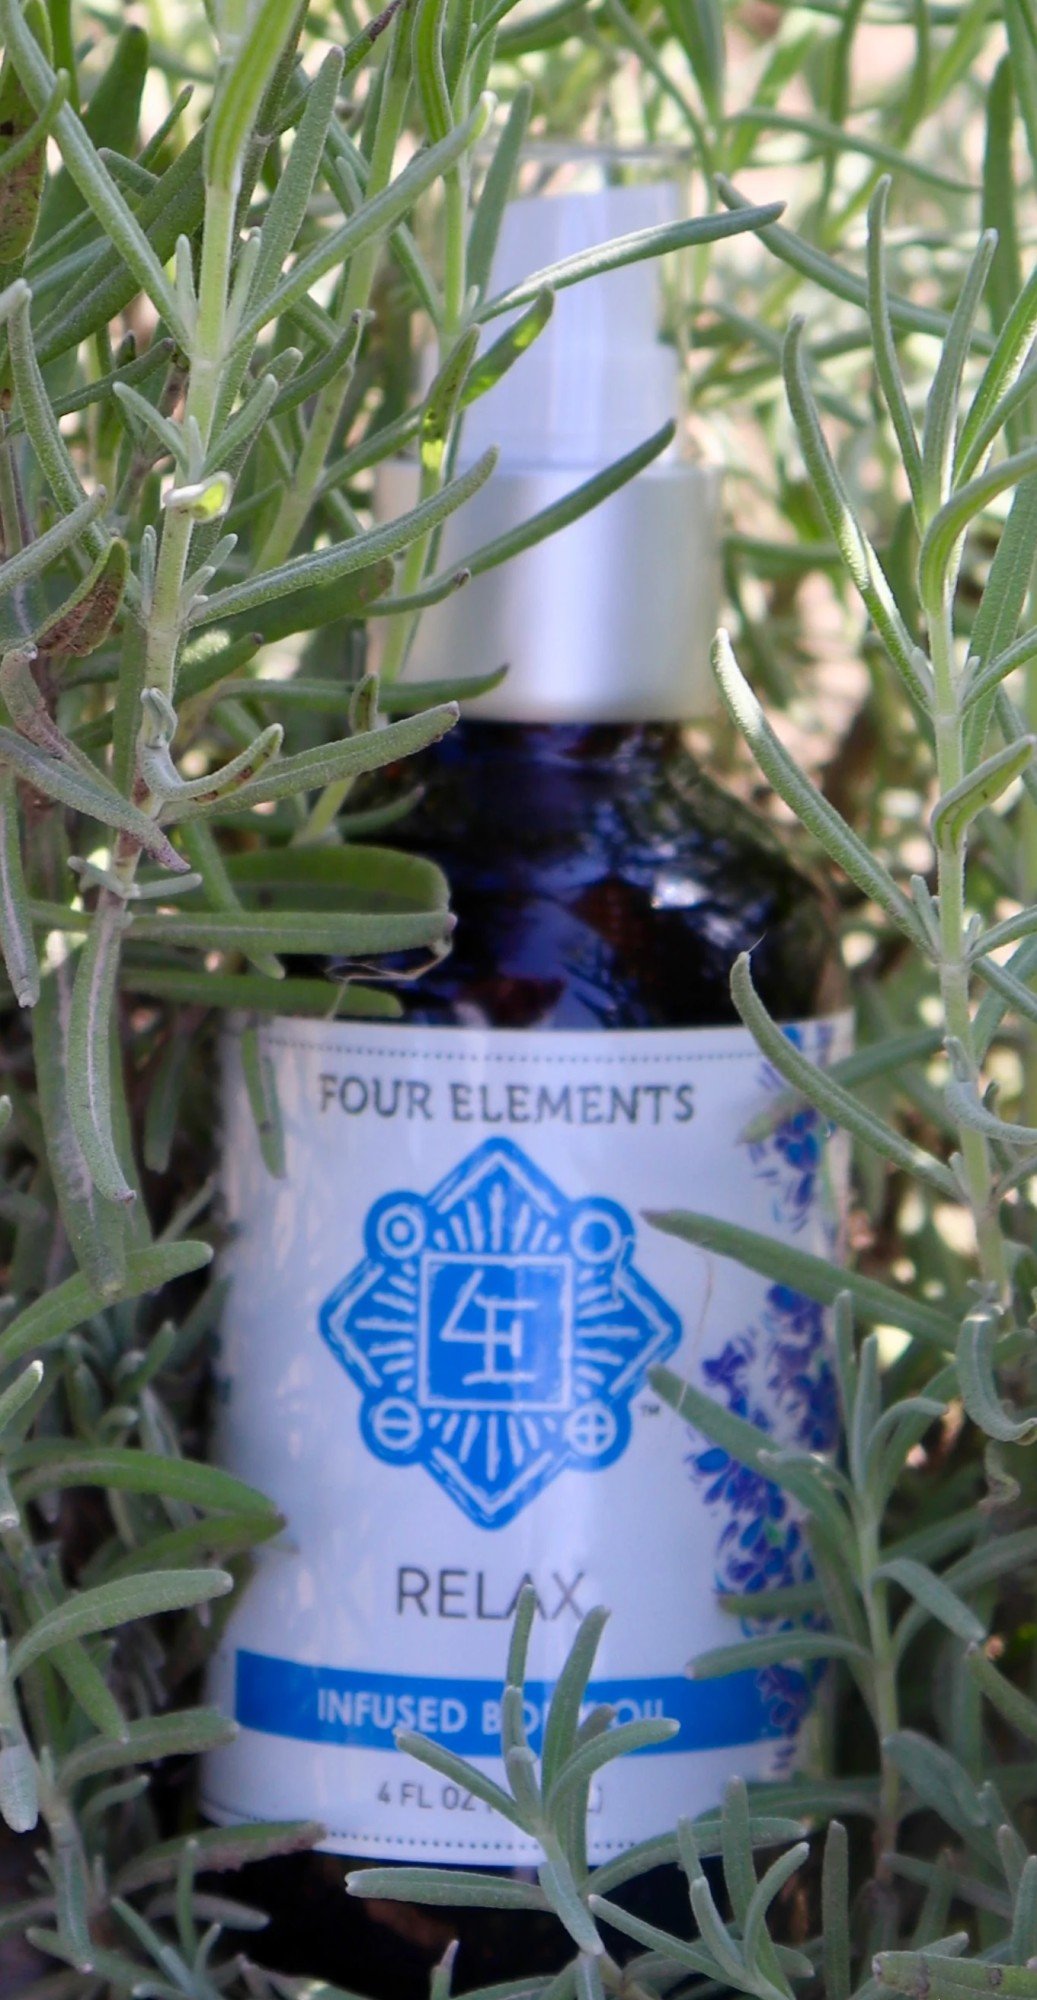 Four Elements Organic Herbals Relax Body Oil 4 oz Oil - image 1 of 2